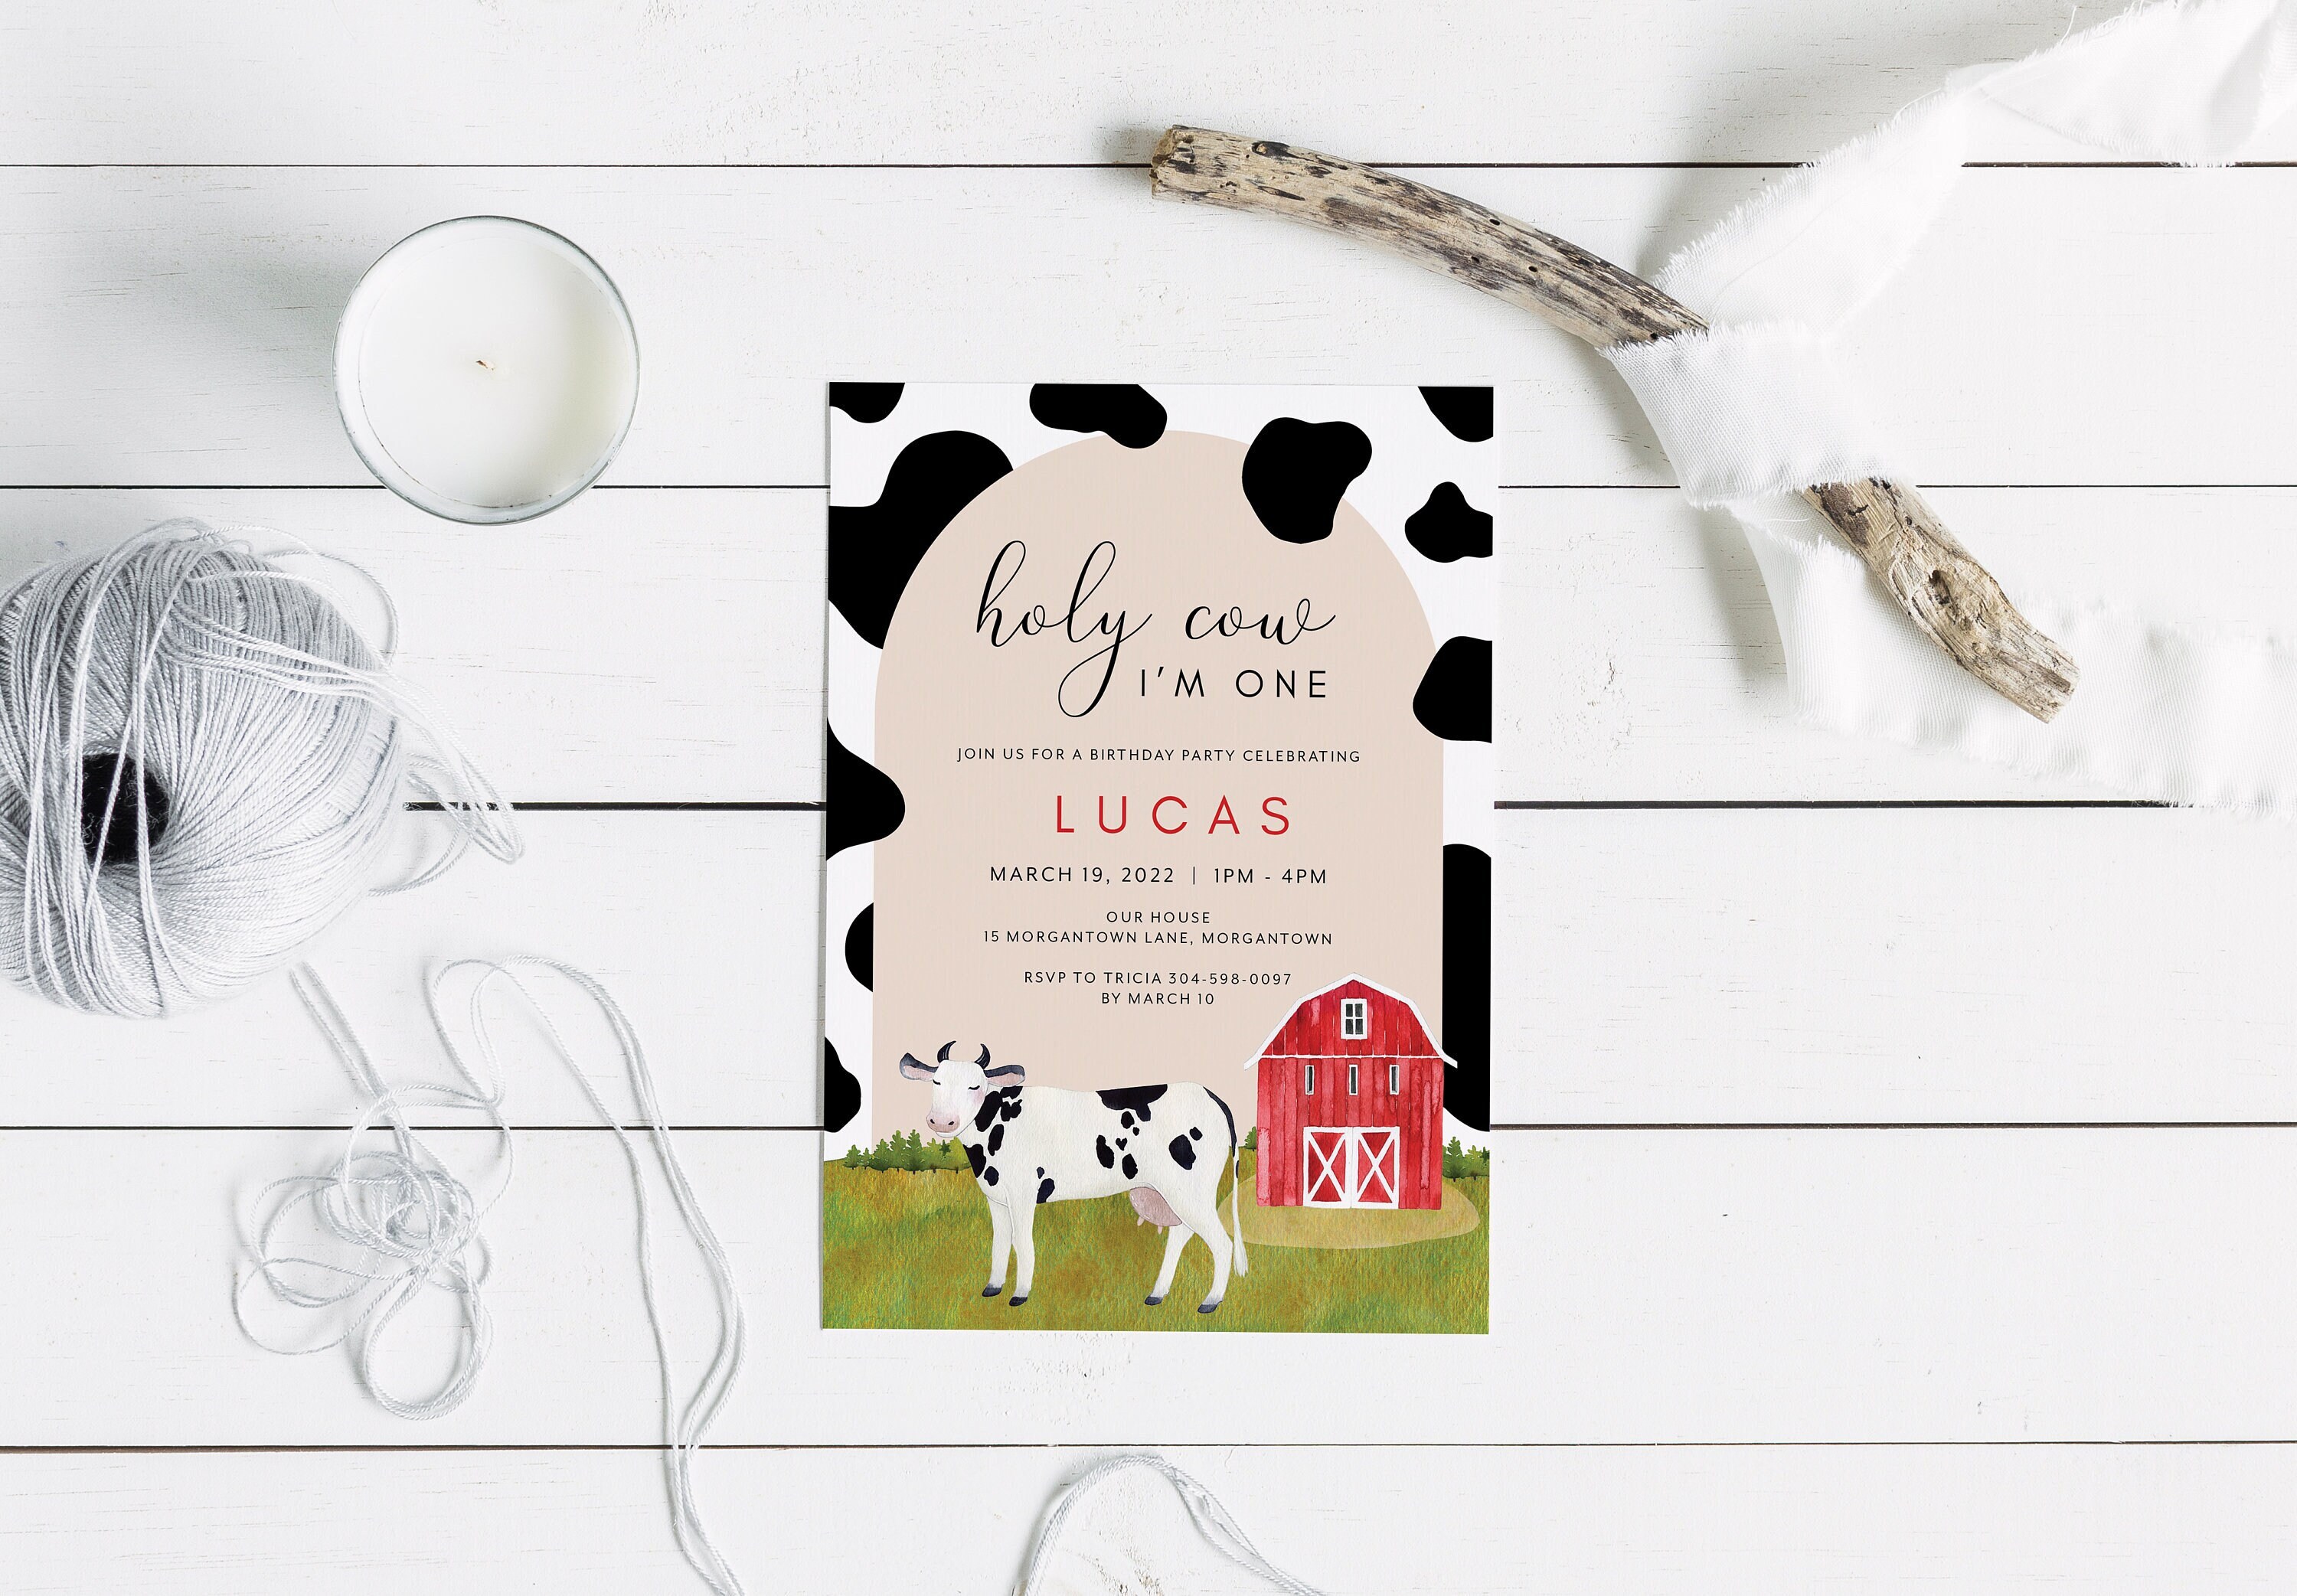 Chick-fil-A Cow-tastic Bundle: Gift Cards, Goodies, and a Mini Moo